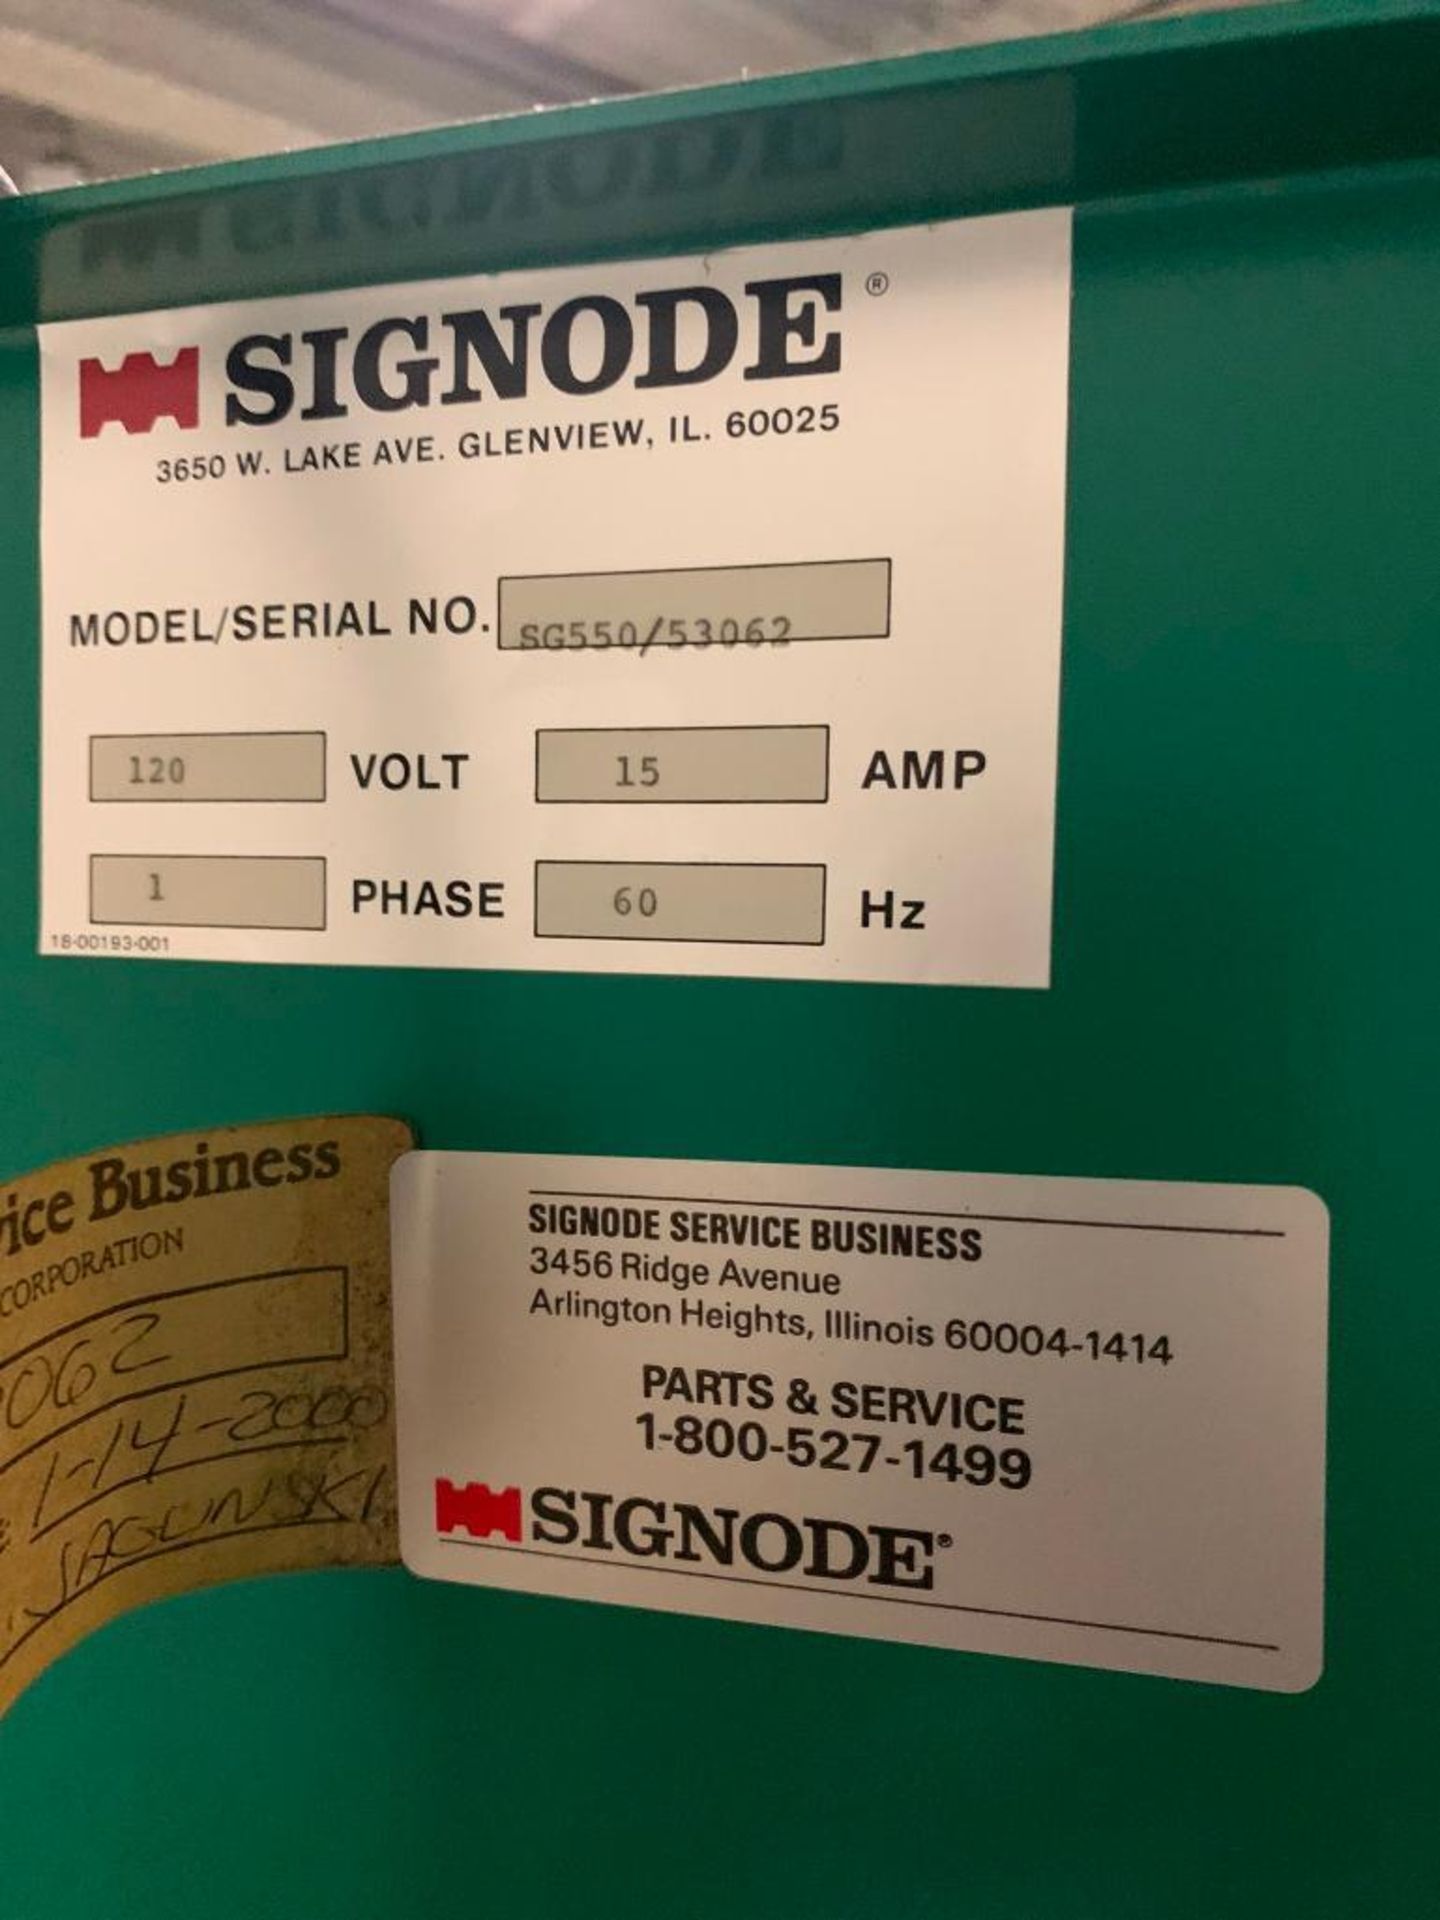 Signode 500 Series Stretch Wrapper, Model SG550/53062, Single-Phase (Needs Repair) - Image 4 of 4